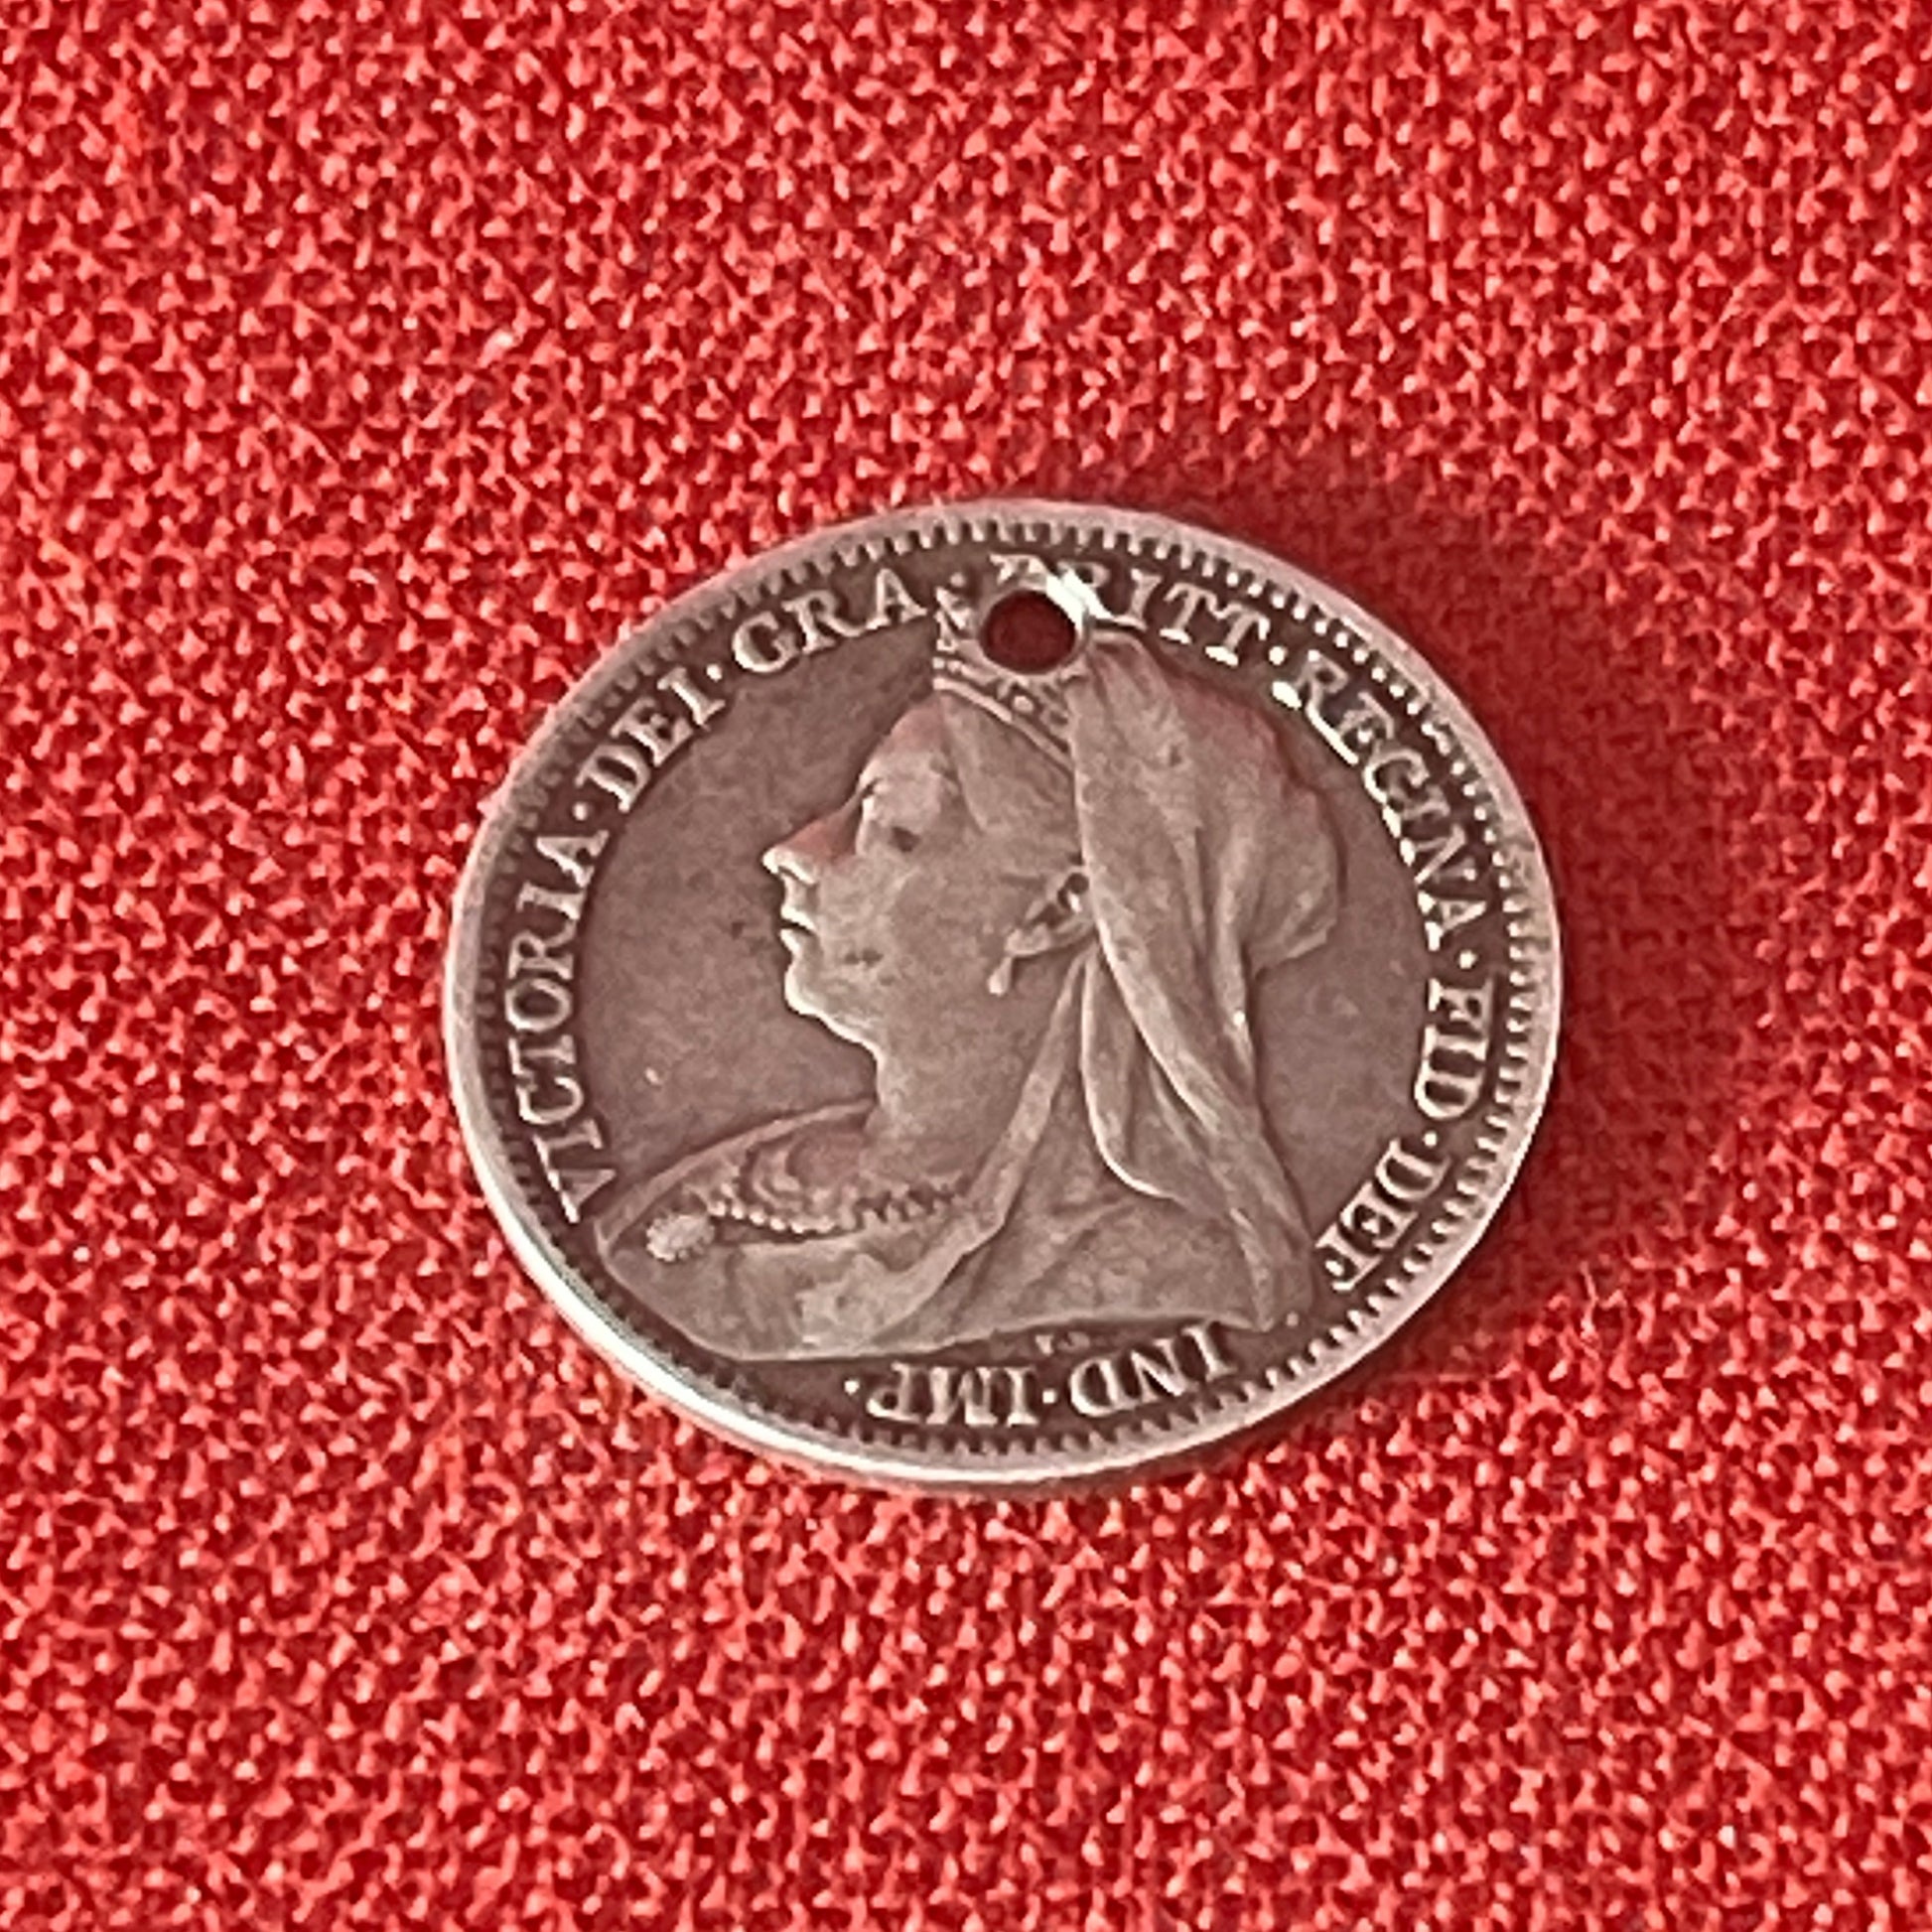 Queen Victoria Threepence 1901 (.925 Sterling Silver) Fine